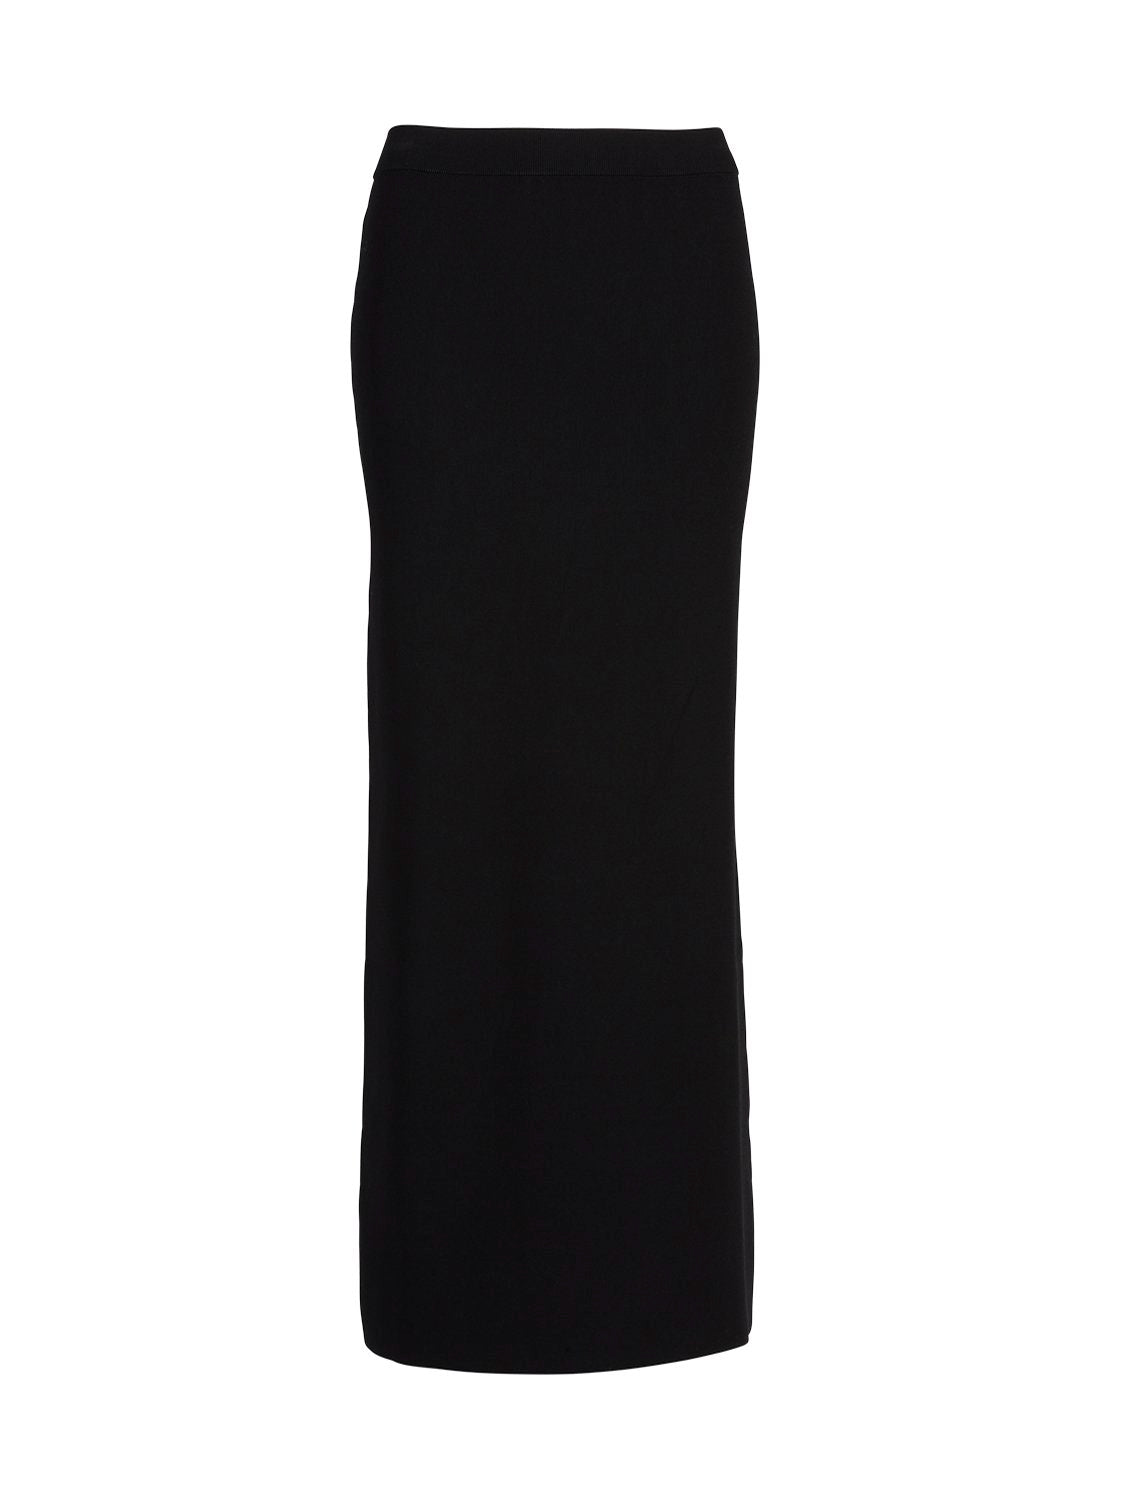 Evie Luxe Knit Maxi Skirt - Black